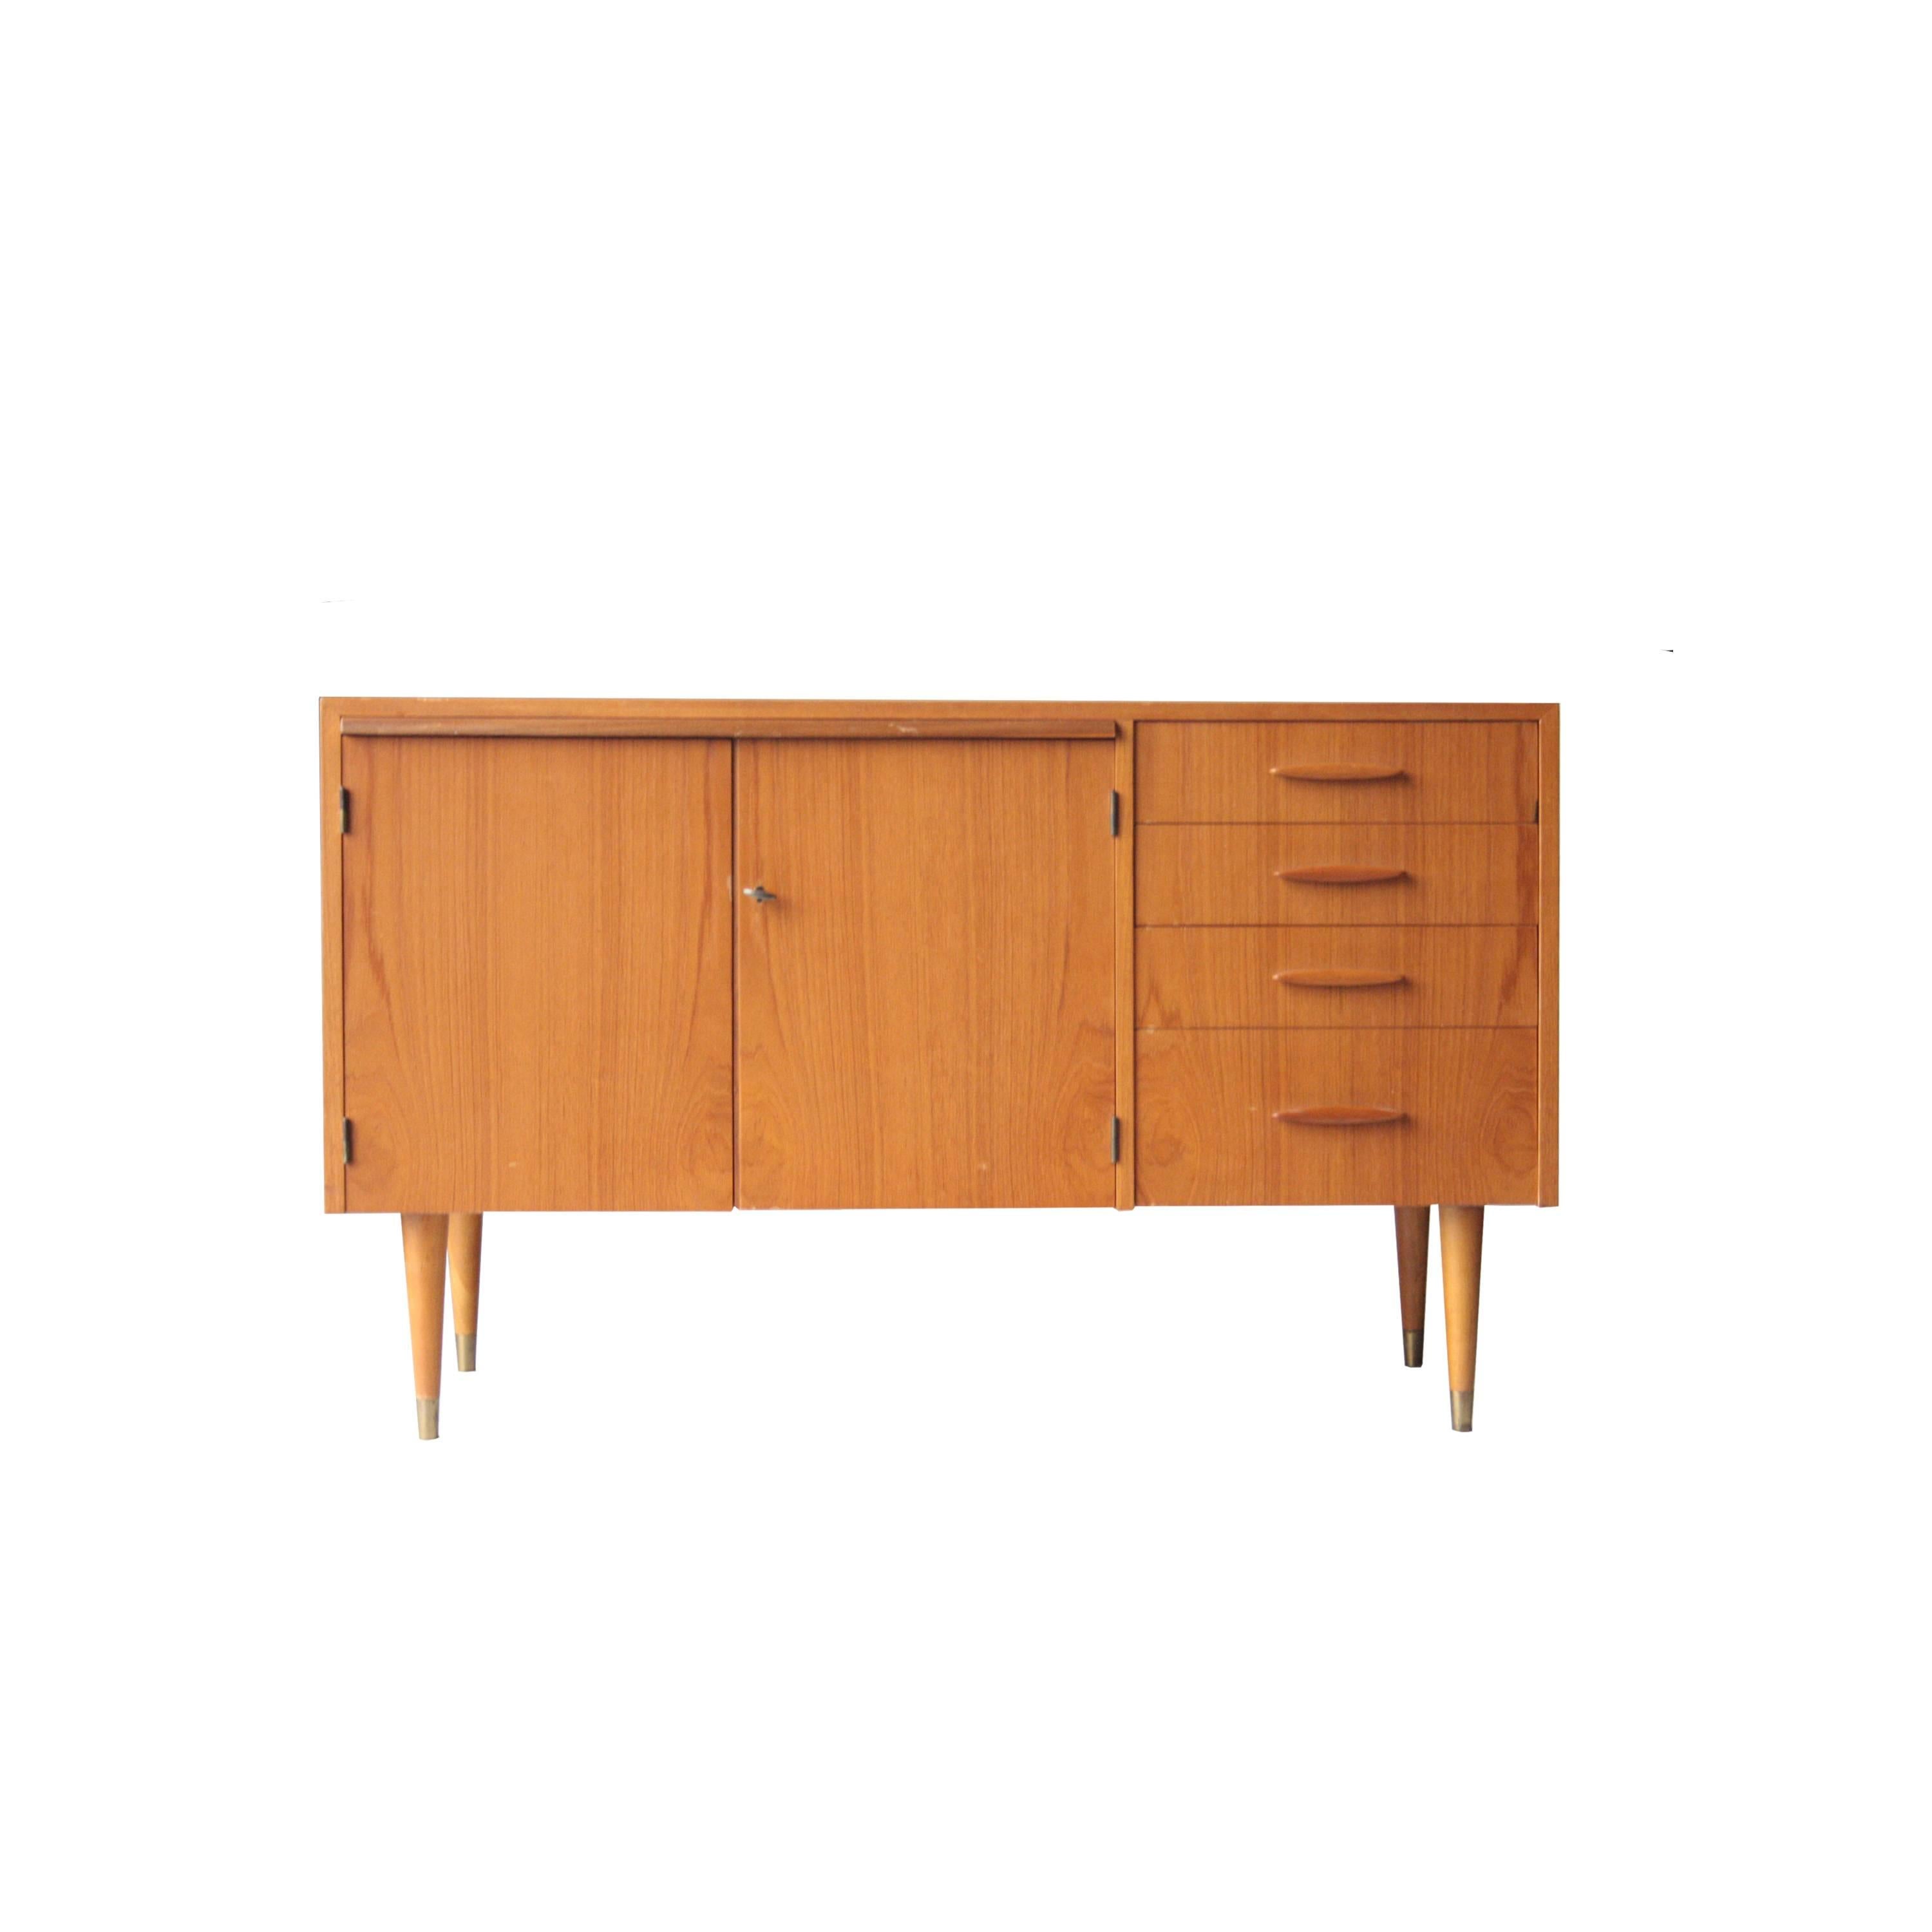 Teak wooden cabinet with doors, drawers and extensible desk. Conic legs with brass finishing.
 